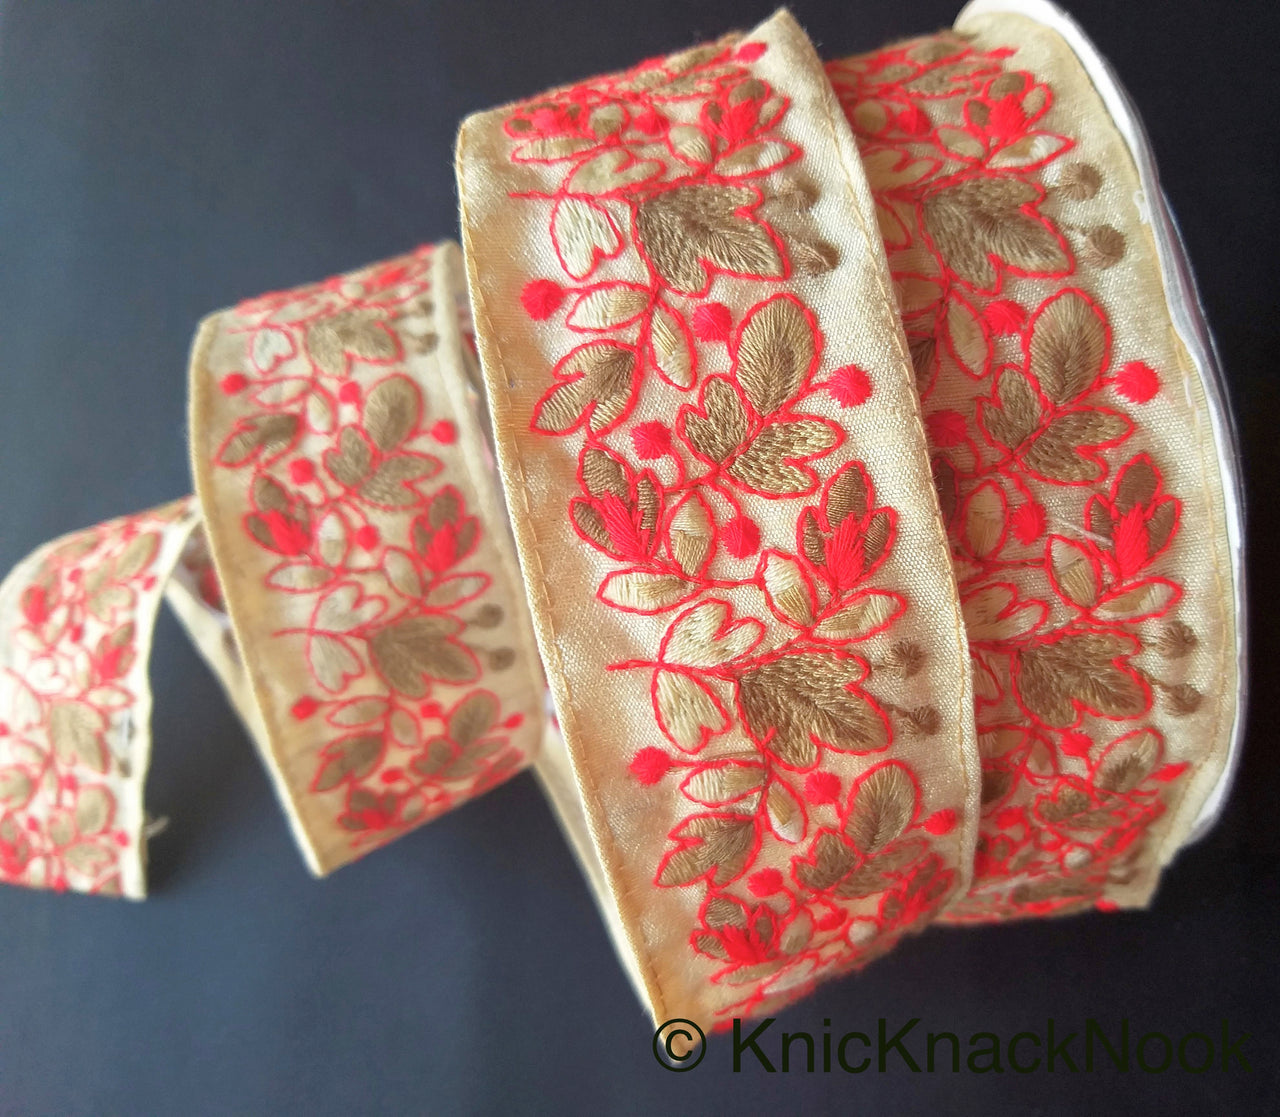 Beige Fabric Trim, Floral Embroidery in Red And Beige / Green And Yellow, Approx. 45mm- 210119L39/40Trim